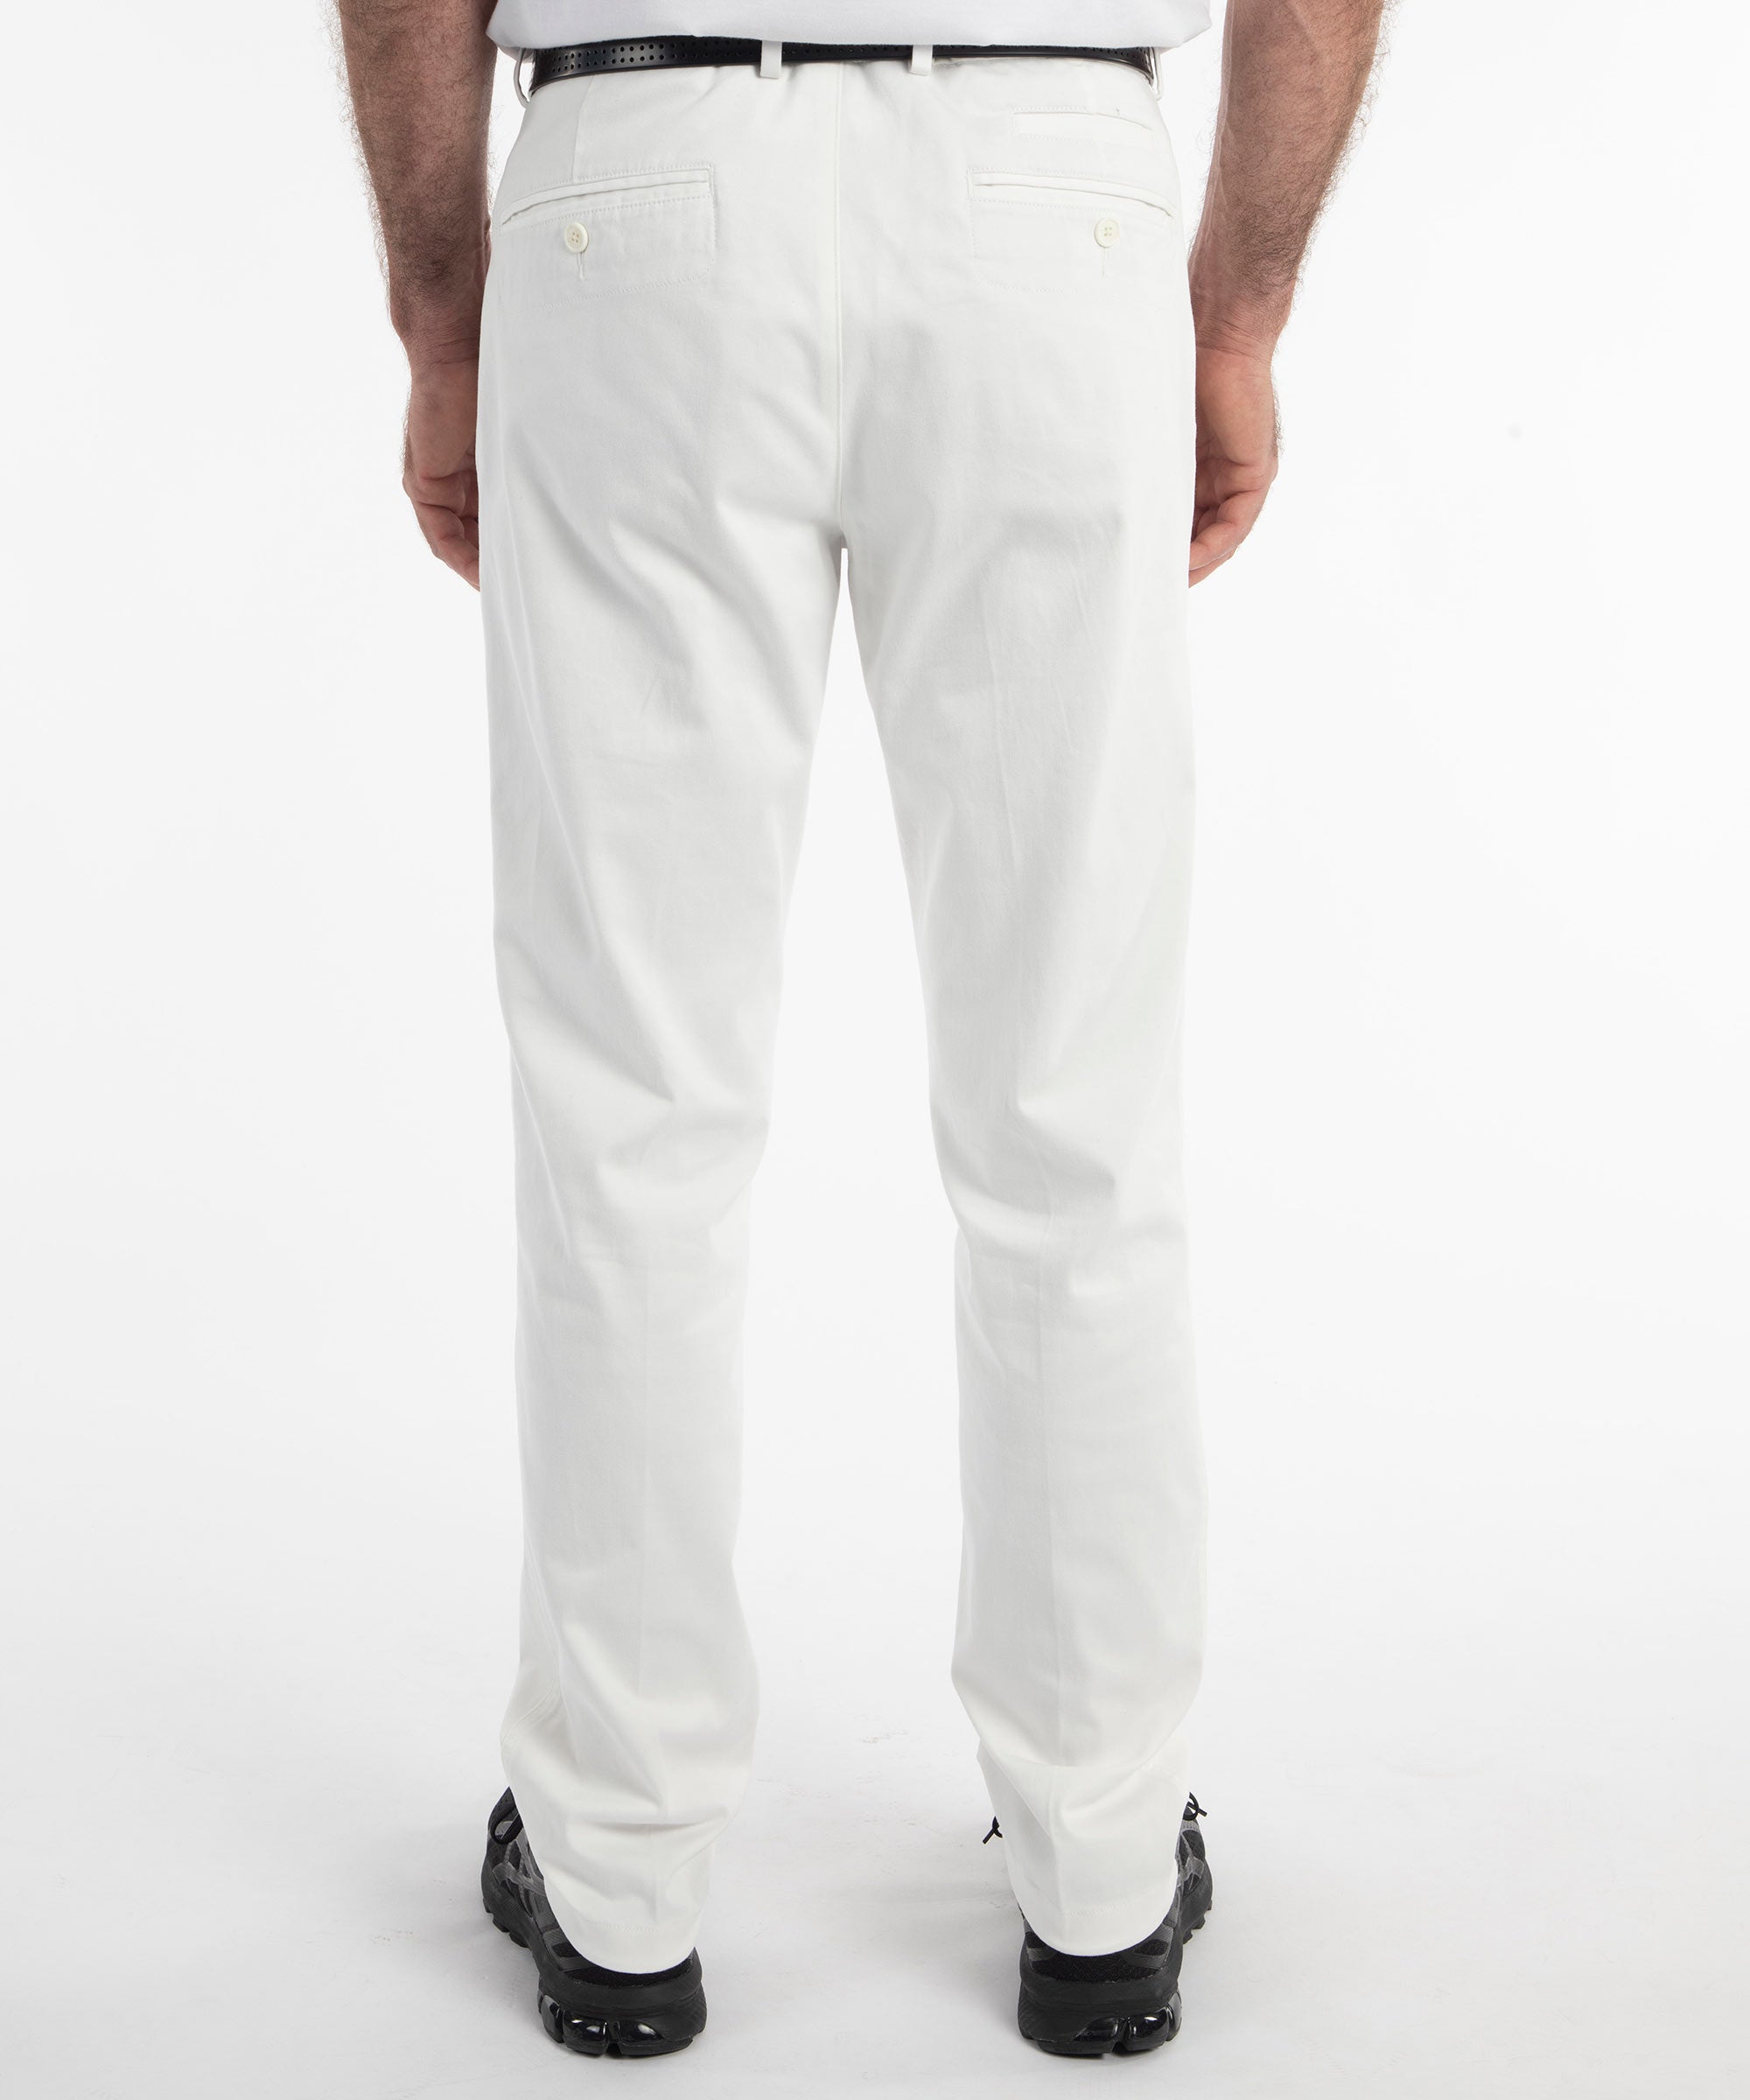 Luxe Blend Chino Pants